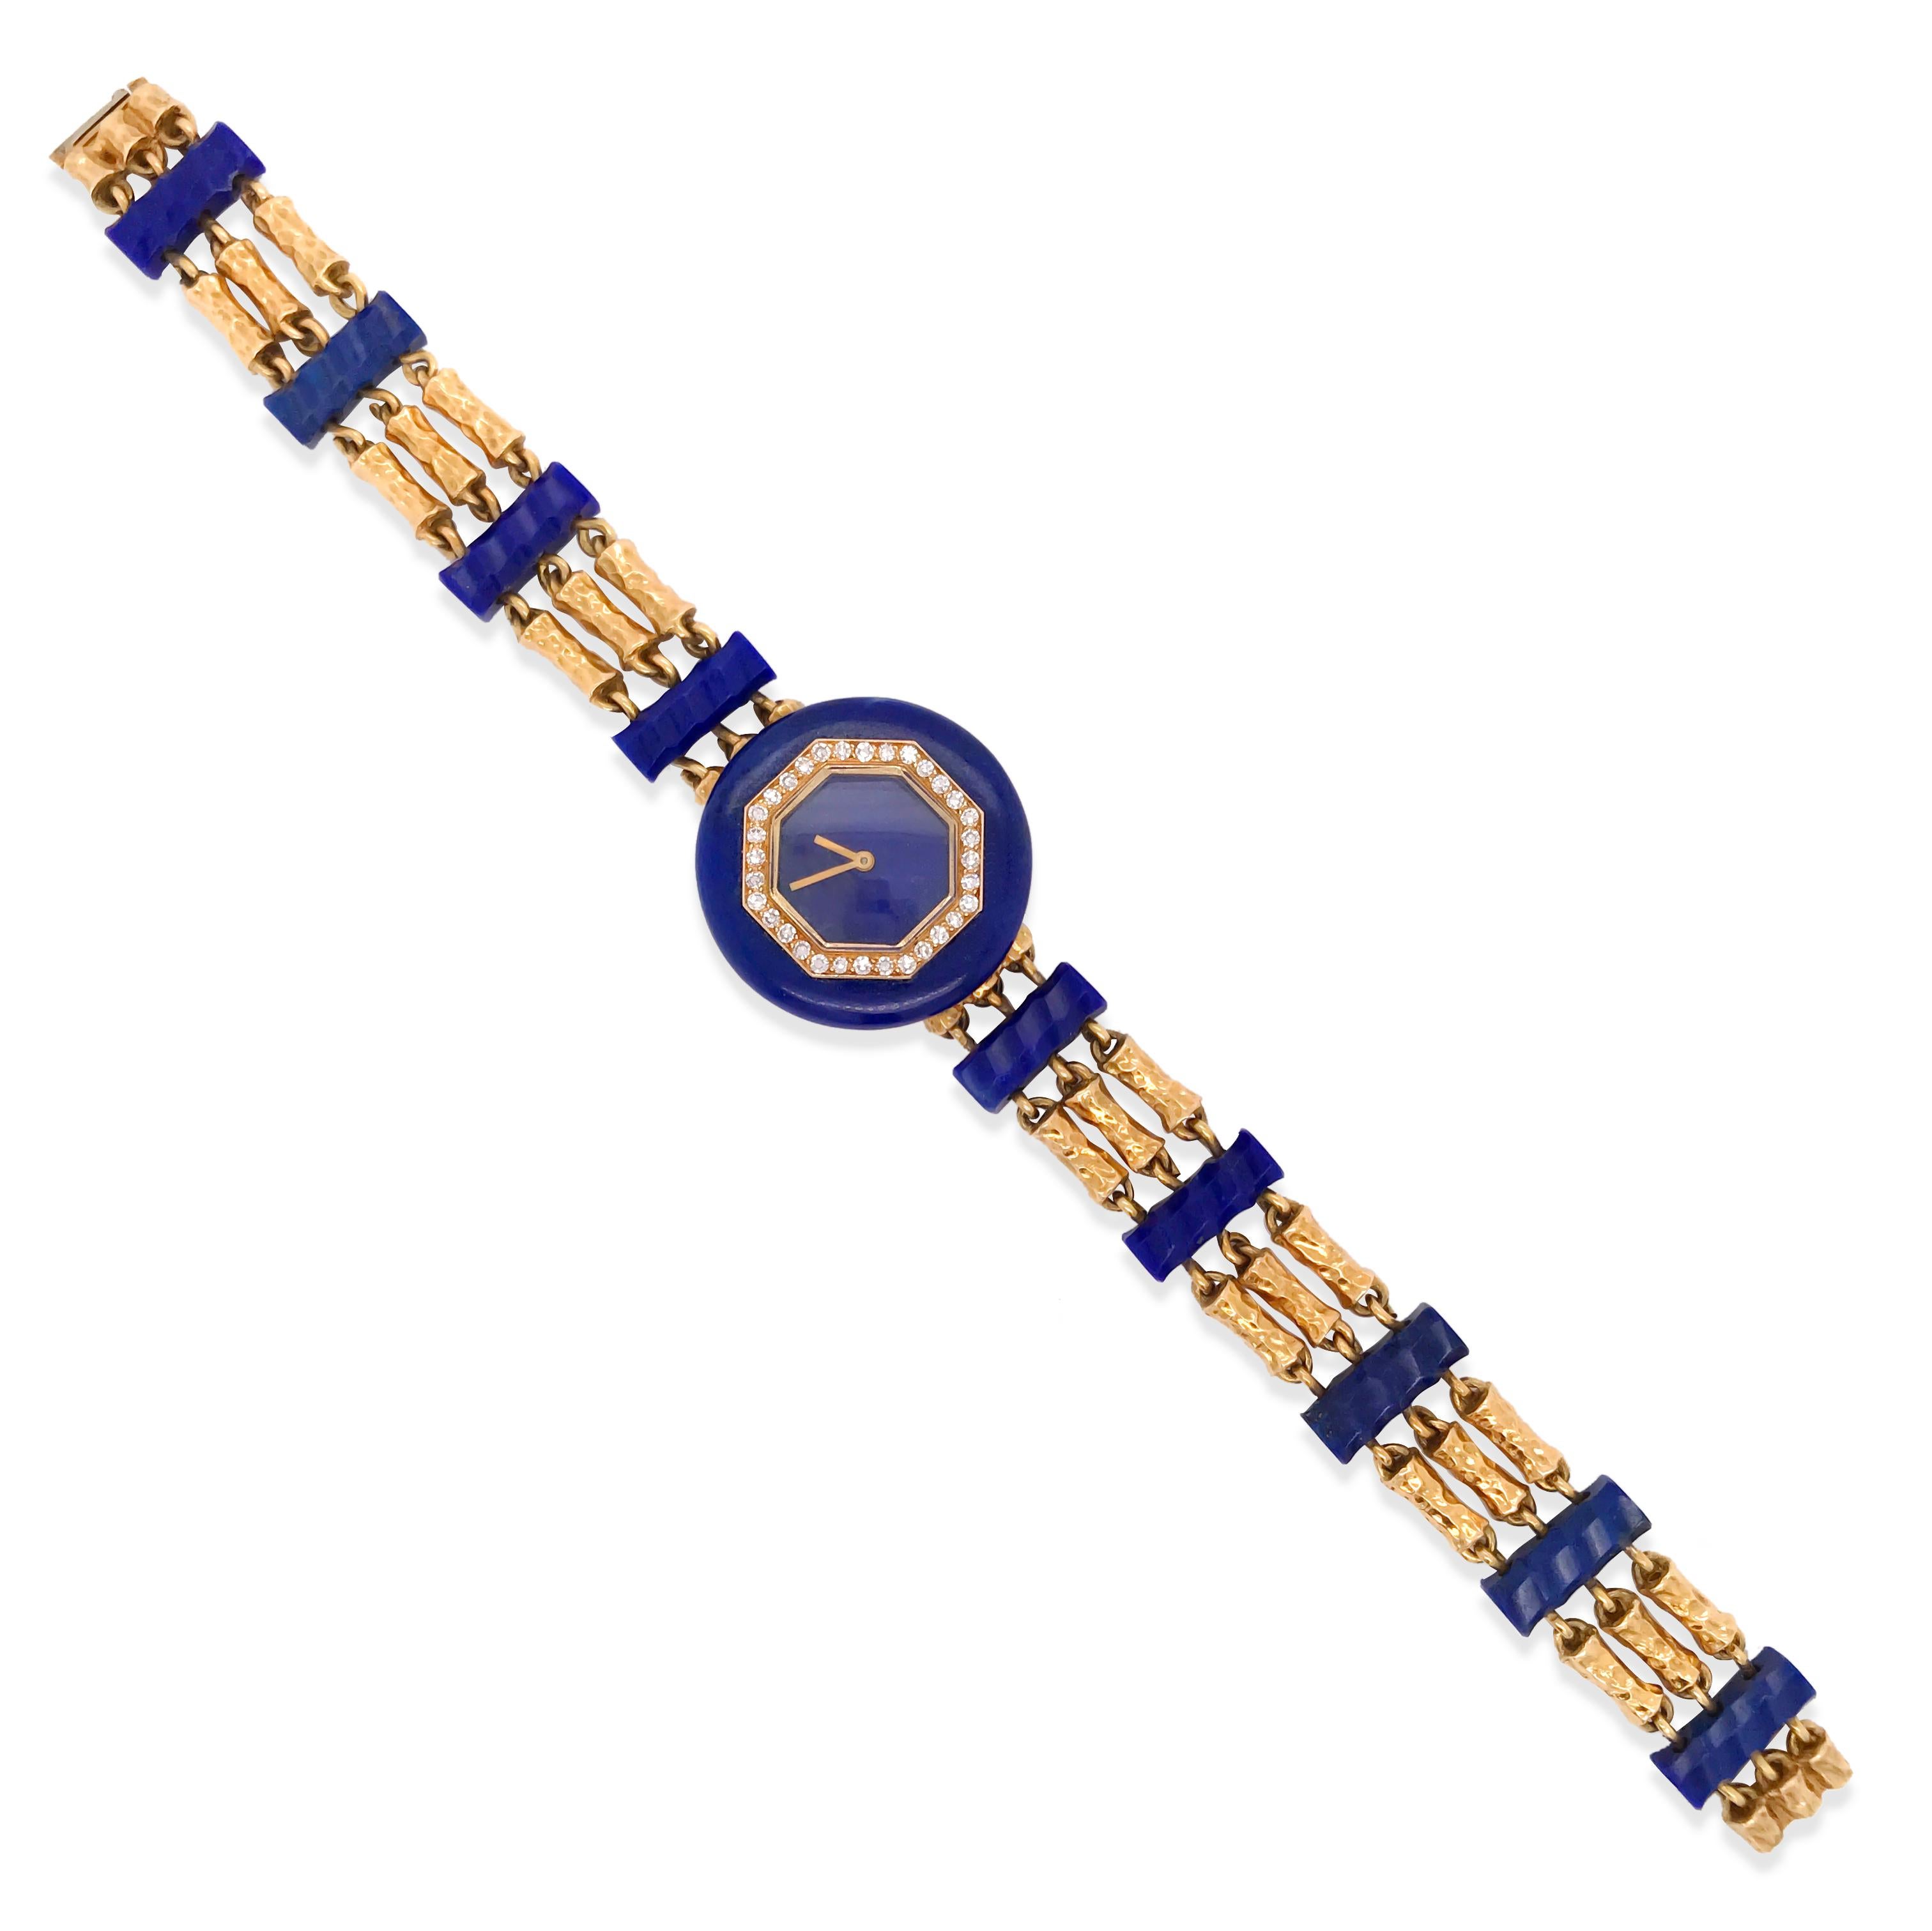 This authentic Boucheron mechanical watch rendered in 18K yellow gold, is centered with a lustrous octagonal lapis dial with visible pyrite line and slightly white line. Framed by 32 single-cut diamonds within a circular bright deep royal blue lapis